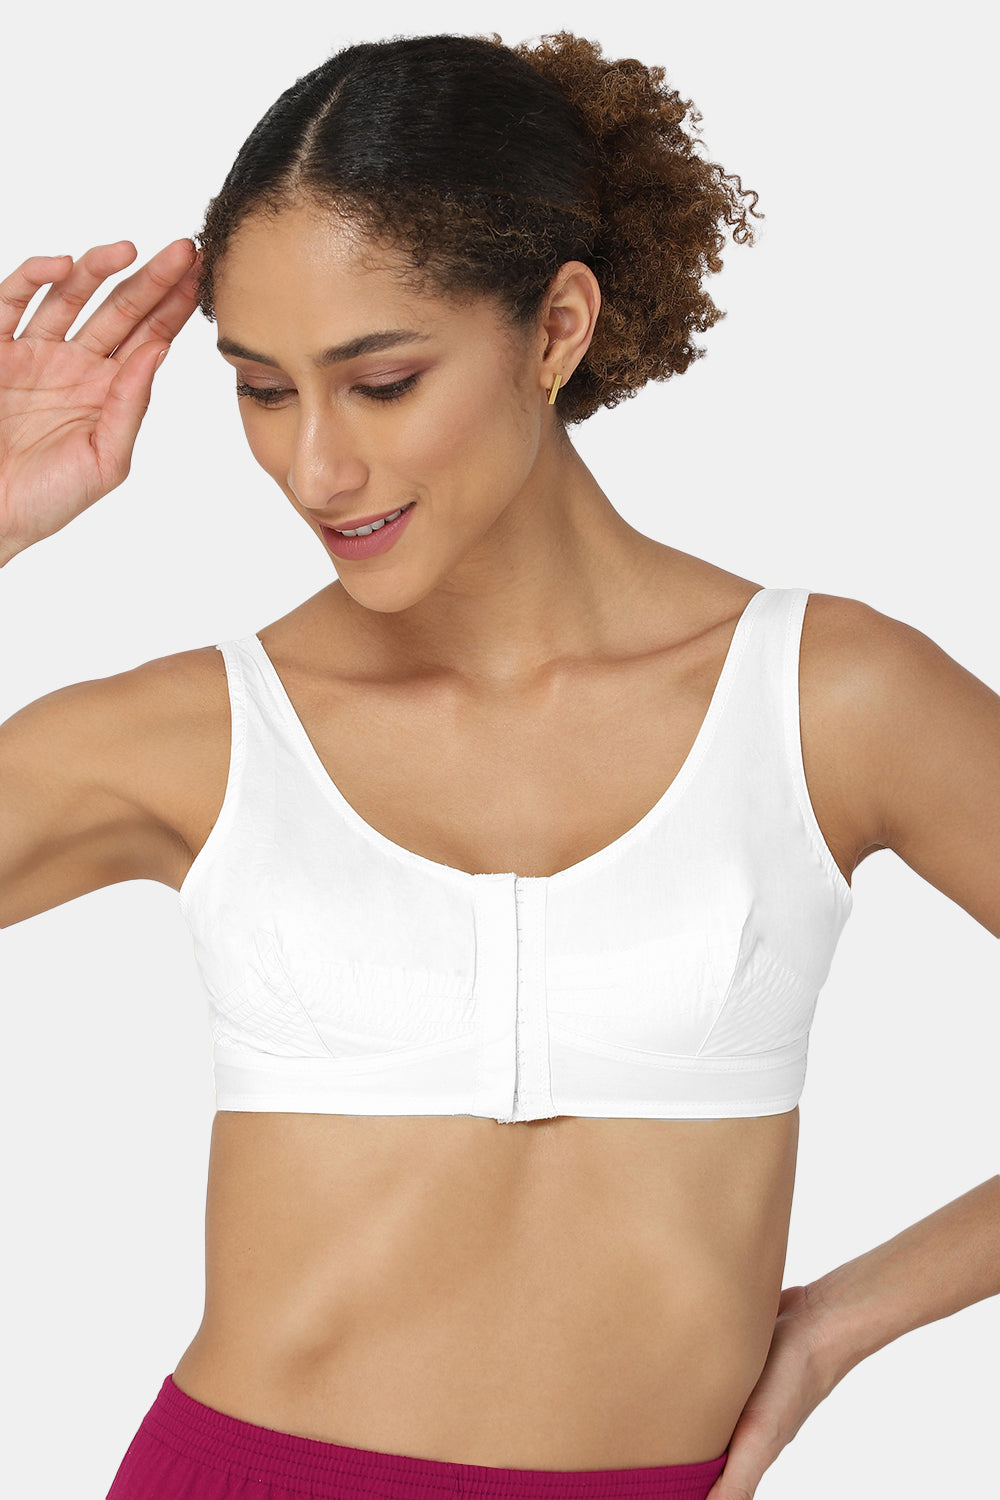 Cotton Indian Bra Comfortable And Soft-Sohoj Online Shopping